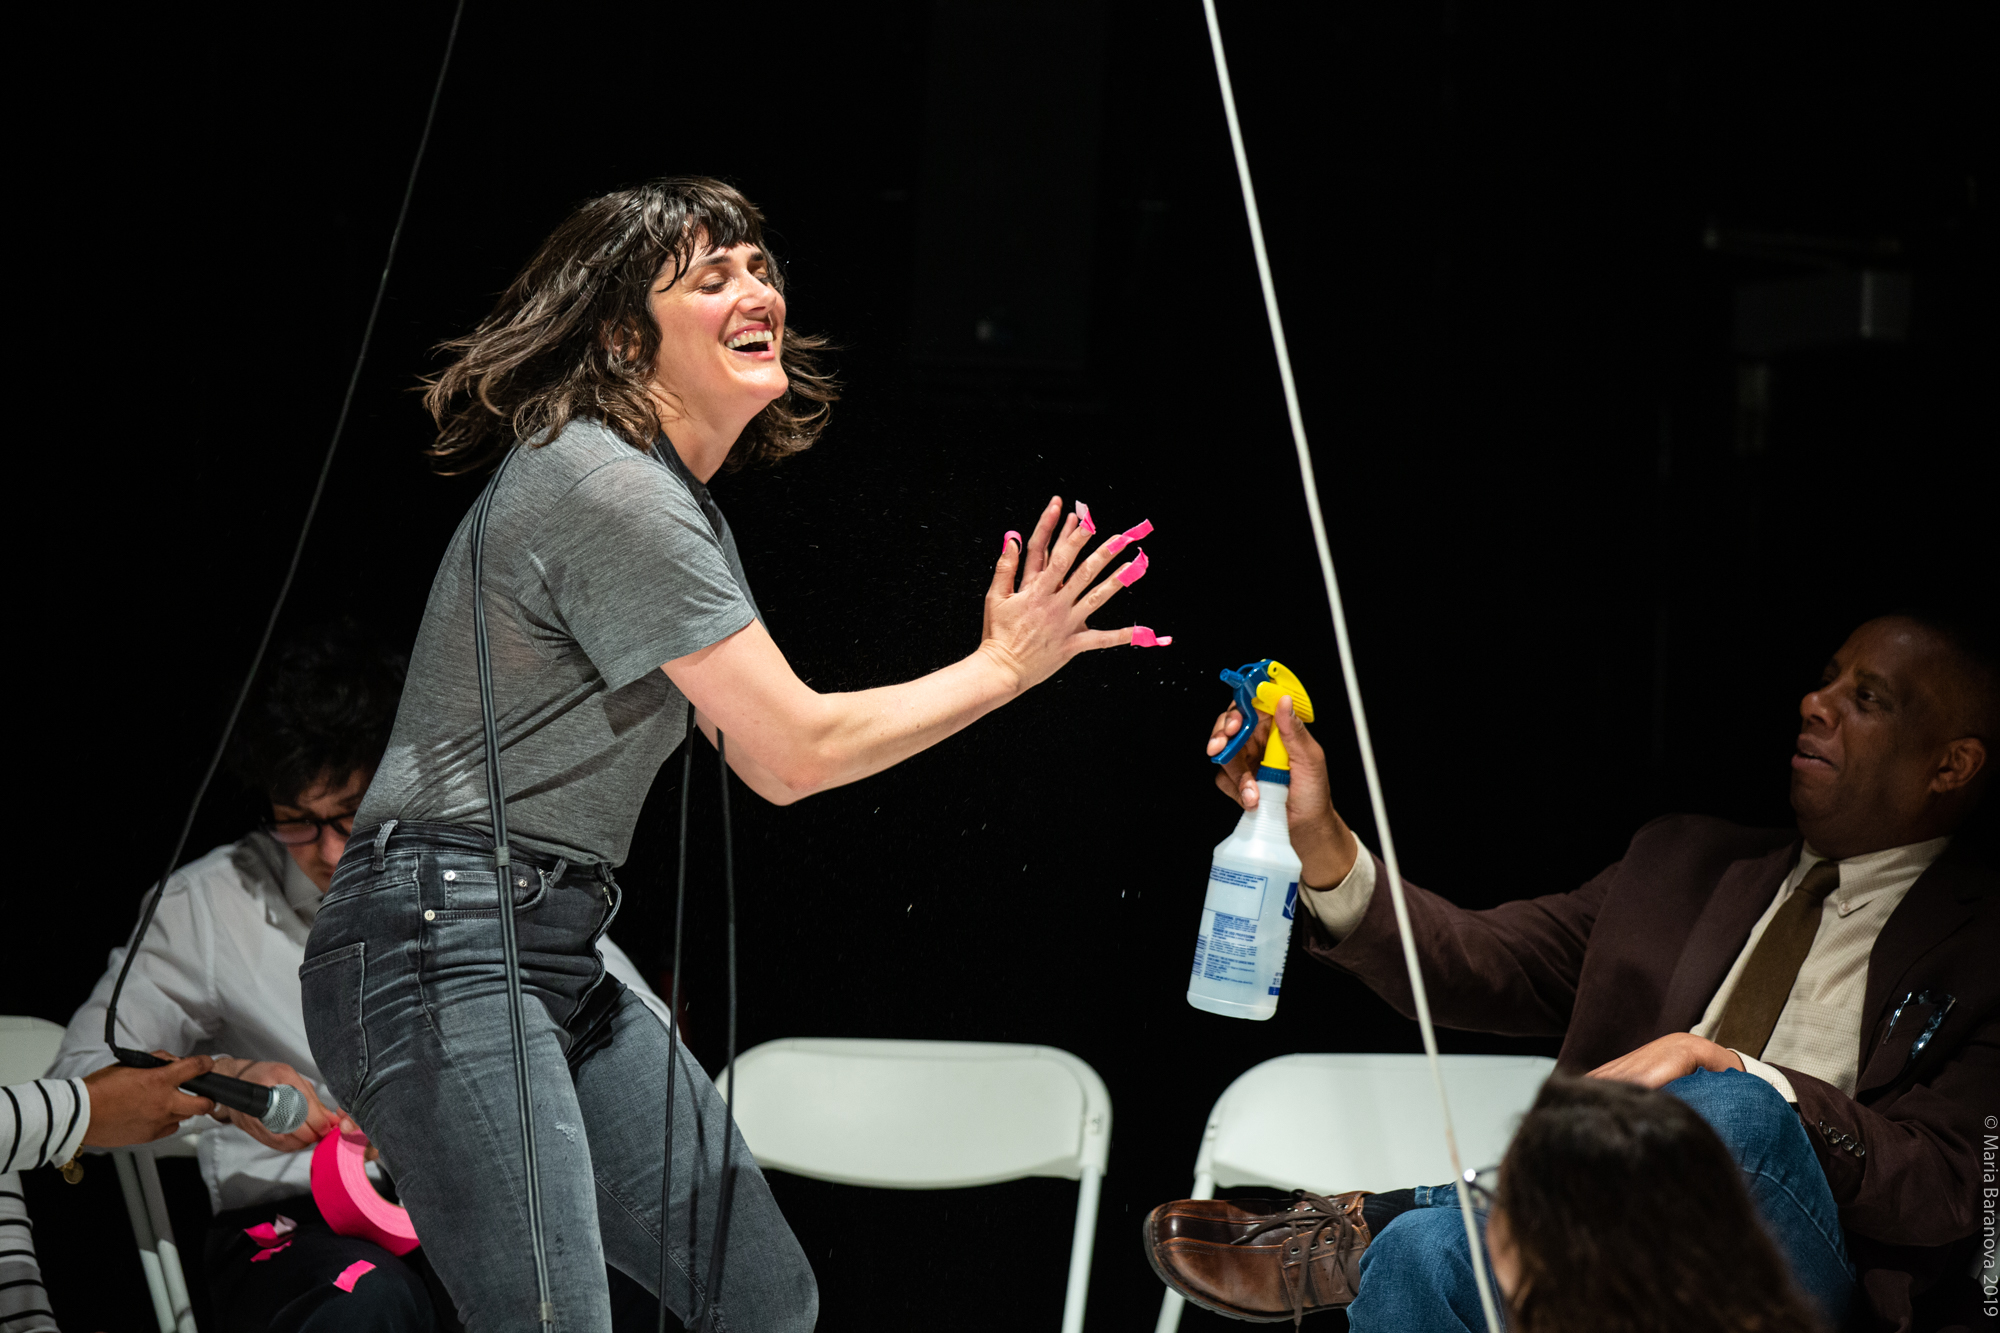 Faye Driscoll being sprayed with a bottle by and audience member.